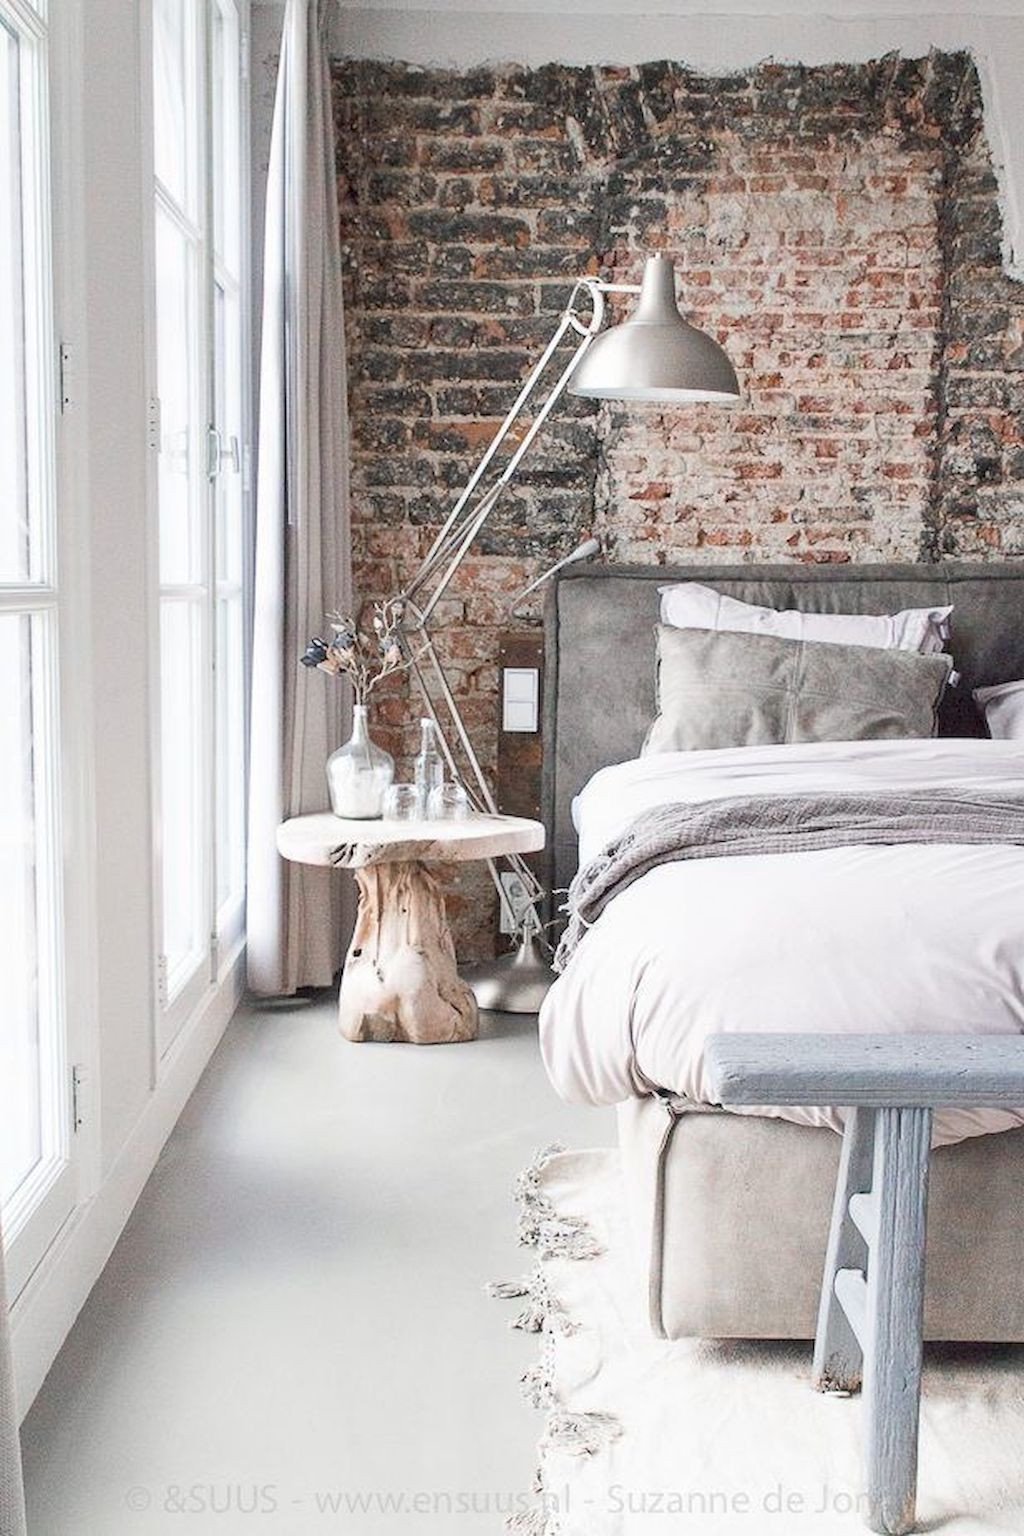 Industrial Style Bedroom Furniture New Pin by Lamp Bedroom On Lamp Bedroom